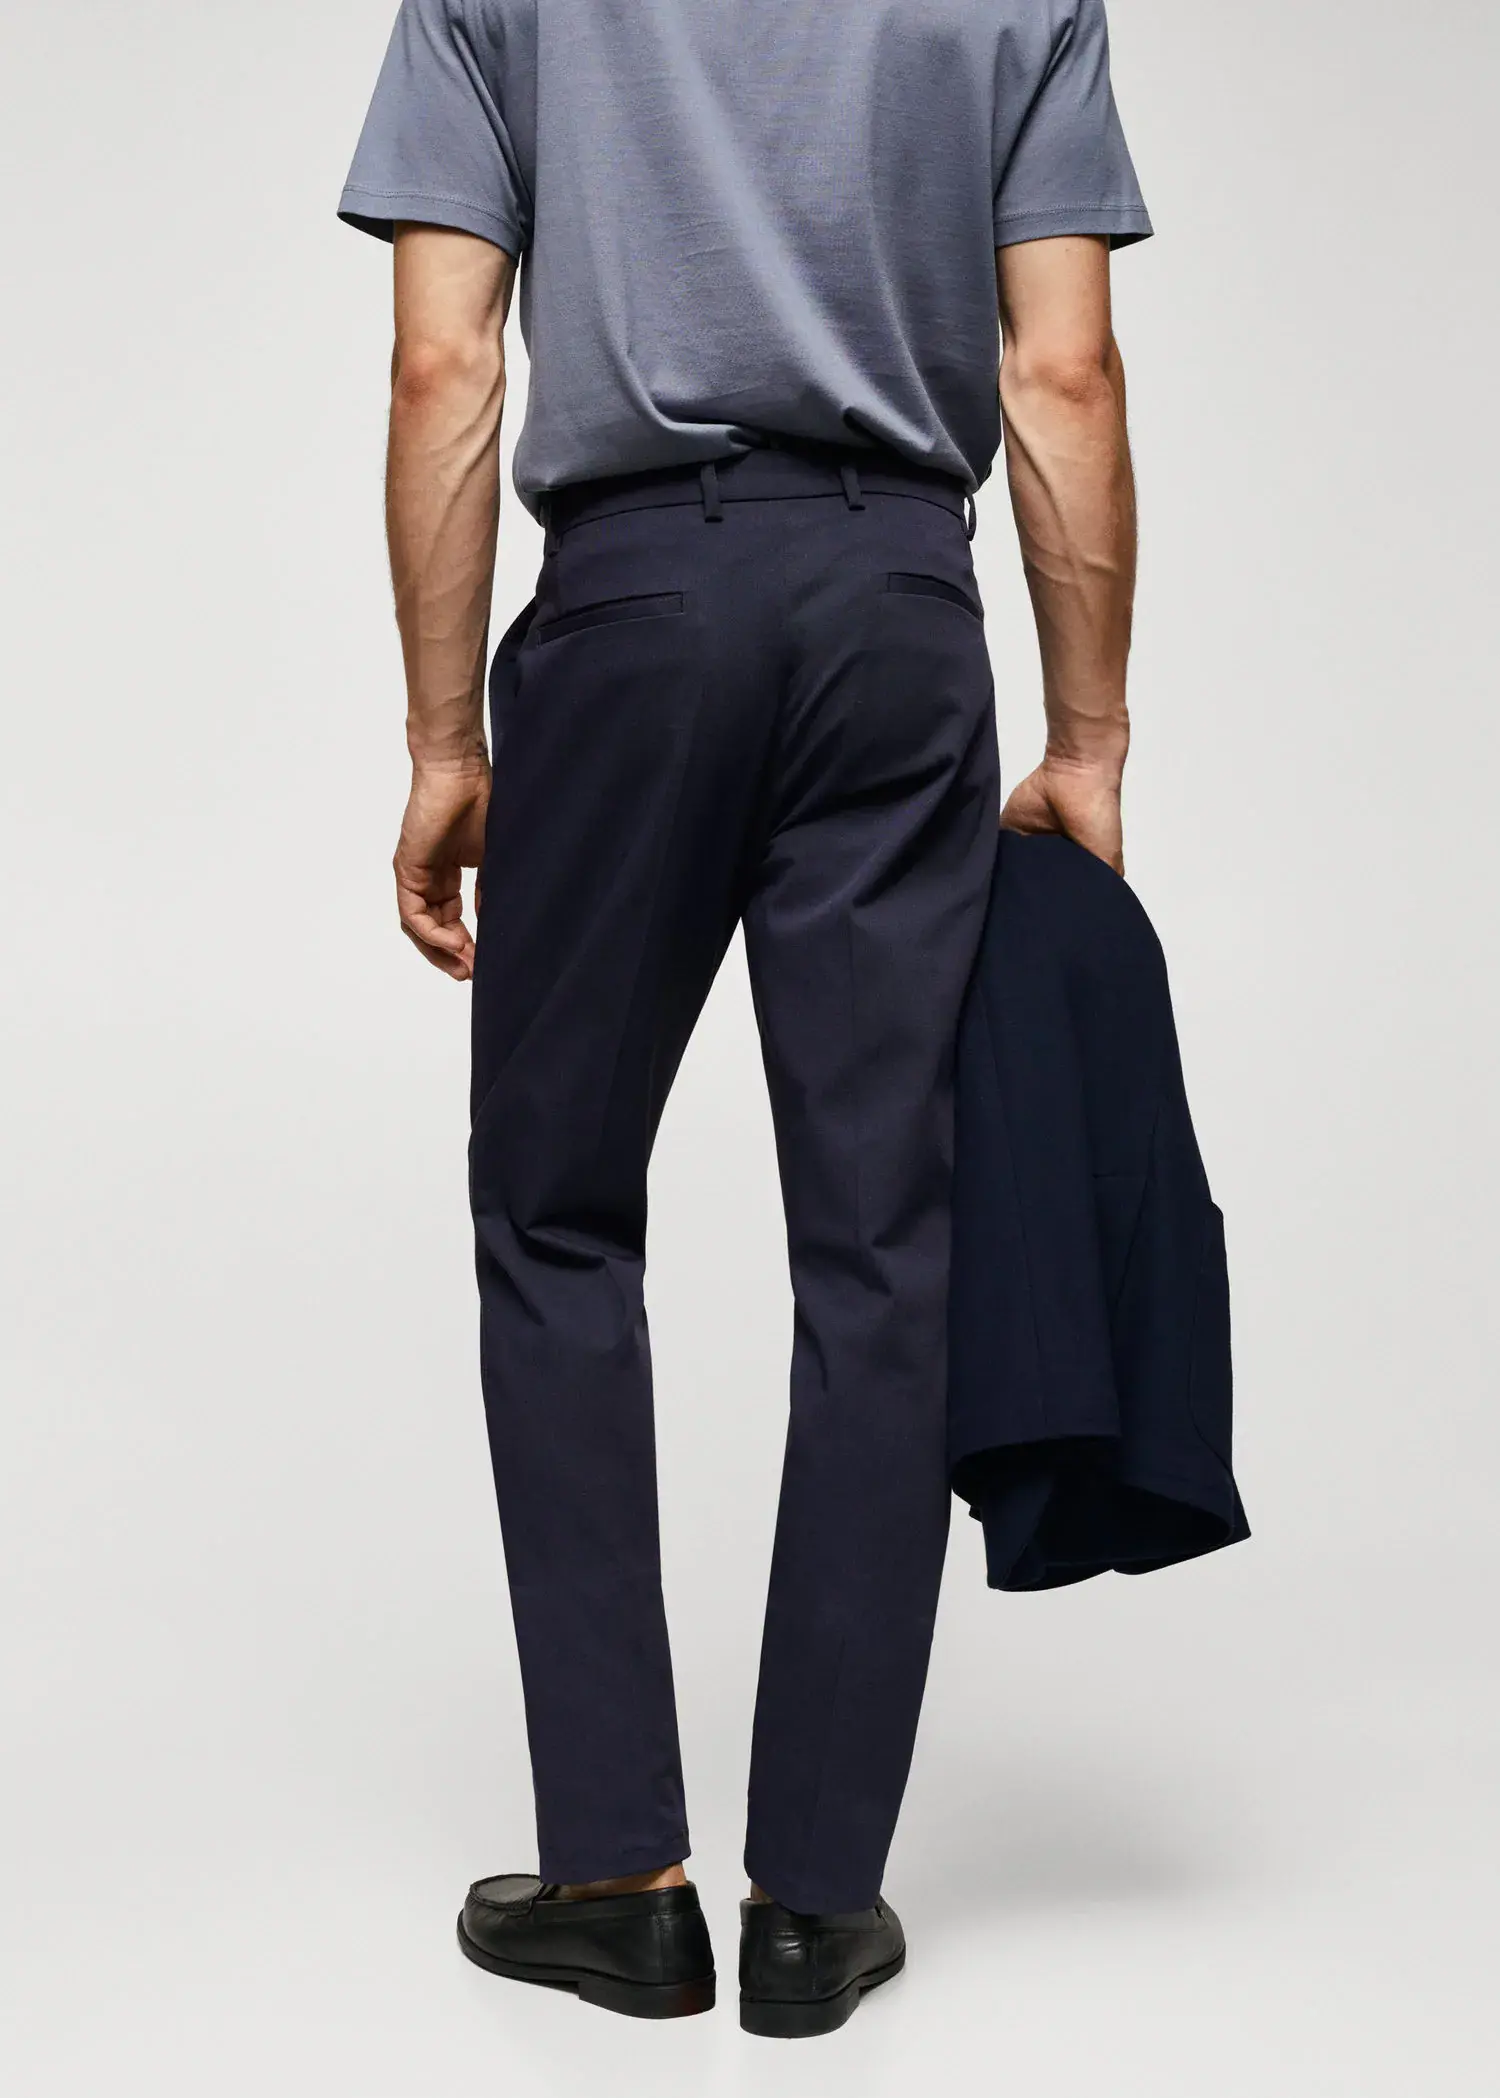 Mango Slim fit chino trousers. a man wearing a suit and tie holding a jacket. 